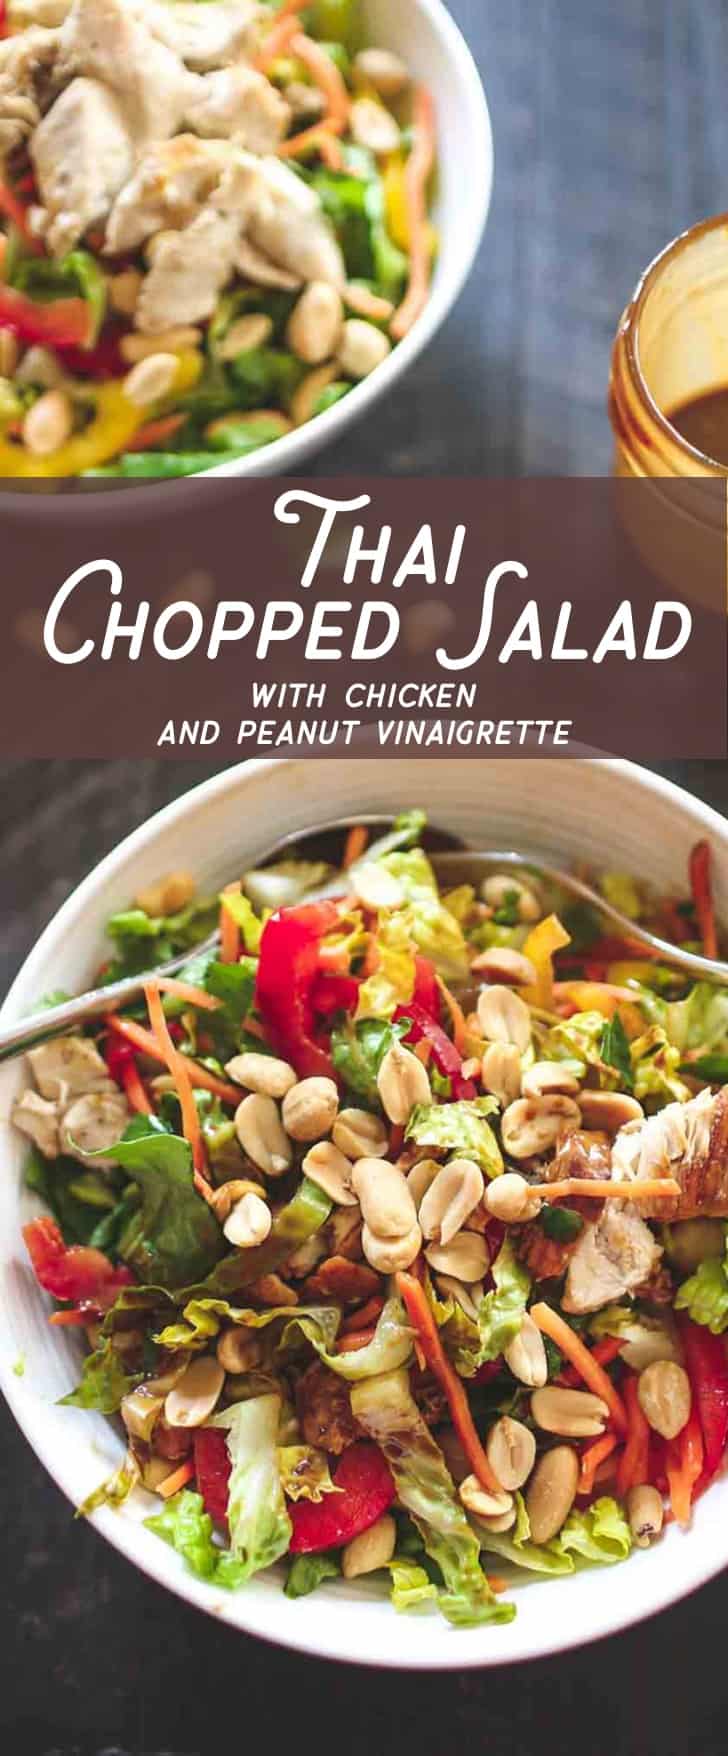 Thai Chopped Chicken Salad- With a rainbow of crunch from peppers and peanuts, protein from tender shredded chicken, and a bit of sweet spice from peanut dressing, this salad is gluten-free and only 350 calories per serving.